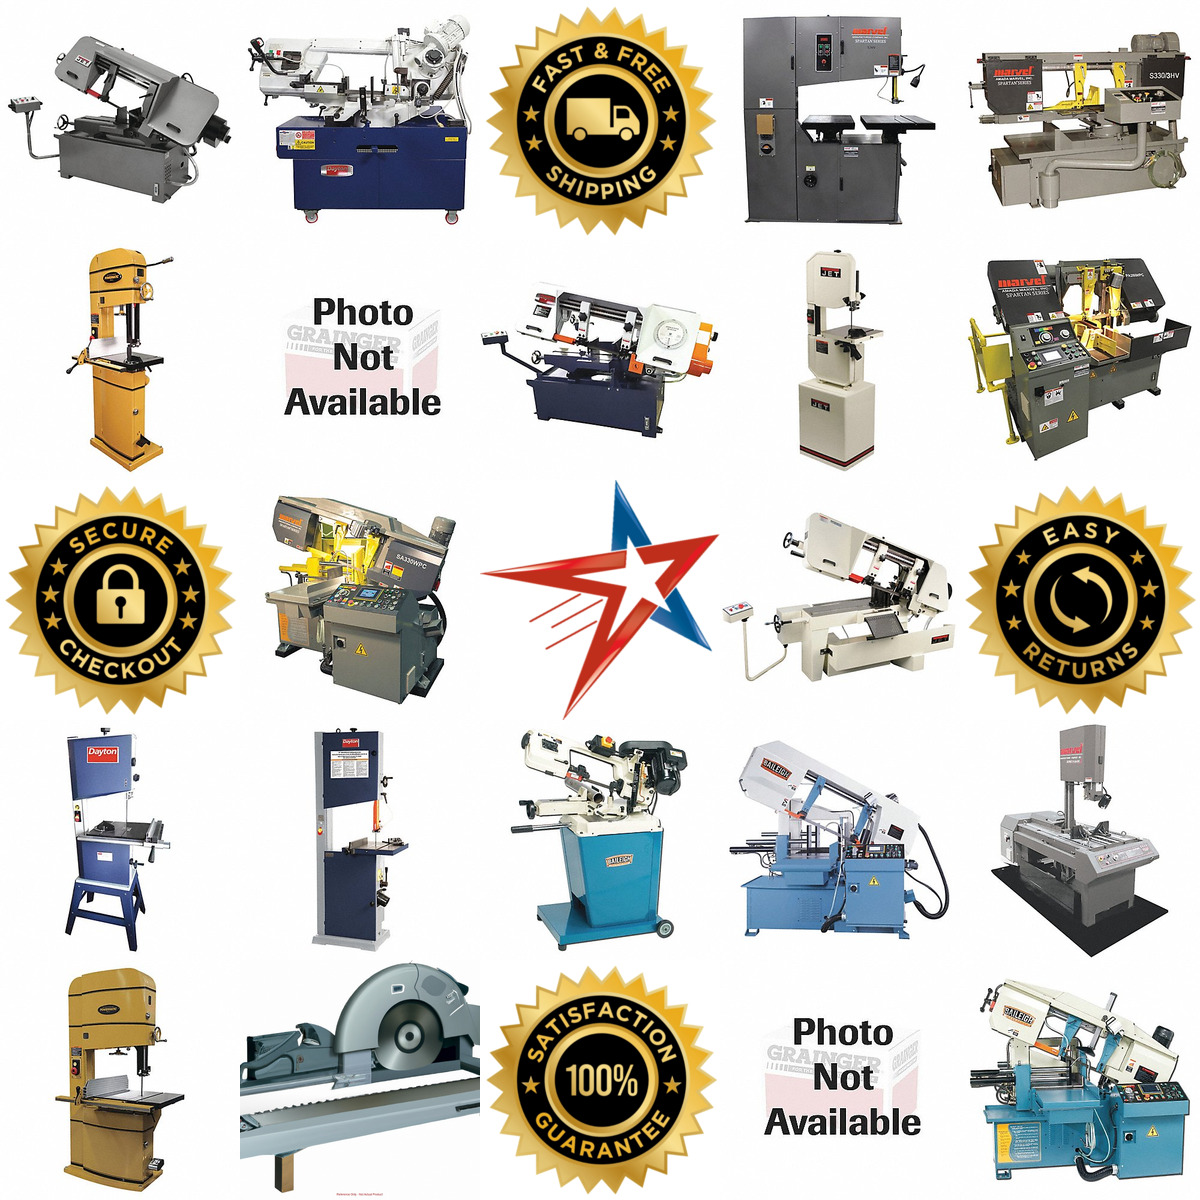 A selection of Stationary Band Saws products on GoVets